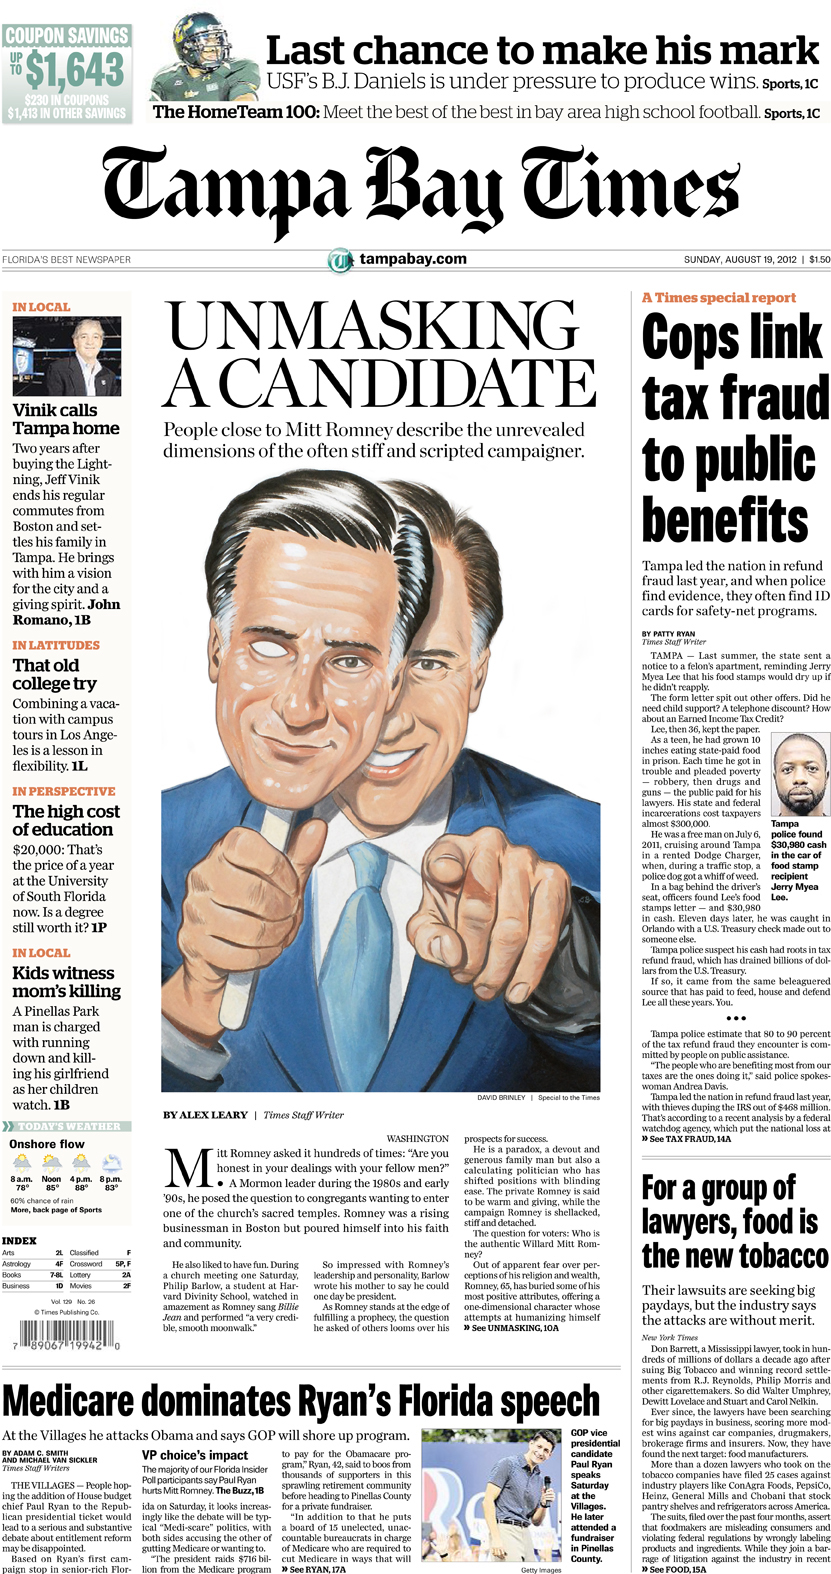   ‘Mitt Romney: Unmasking a Candidate’  &nbsp;| The Tampa Bay Times editorial portrait  